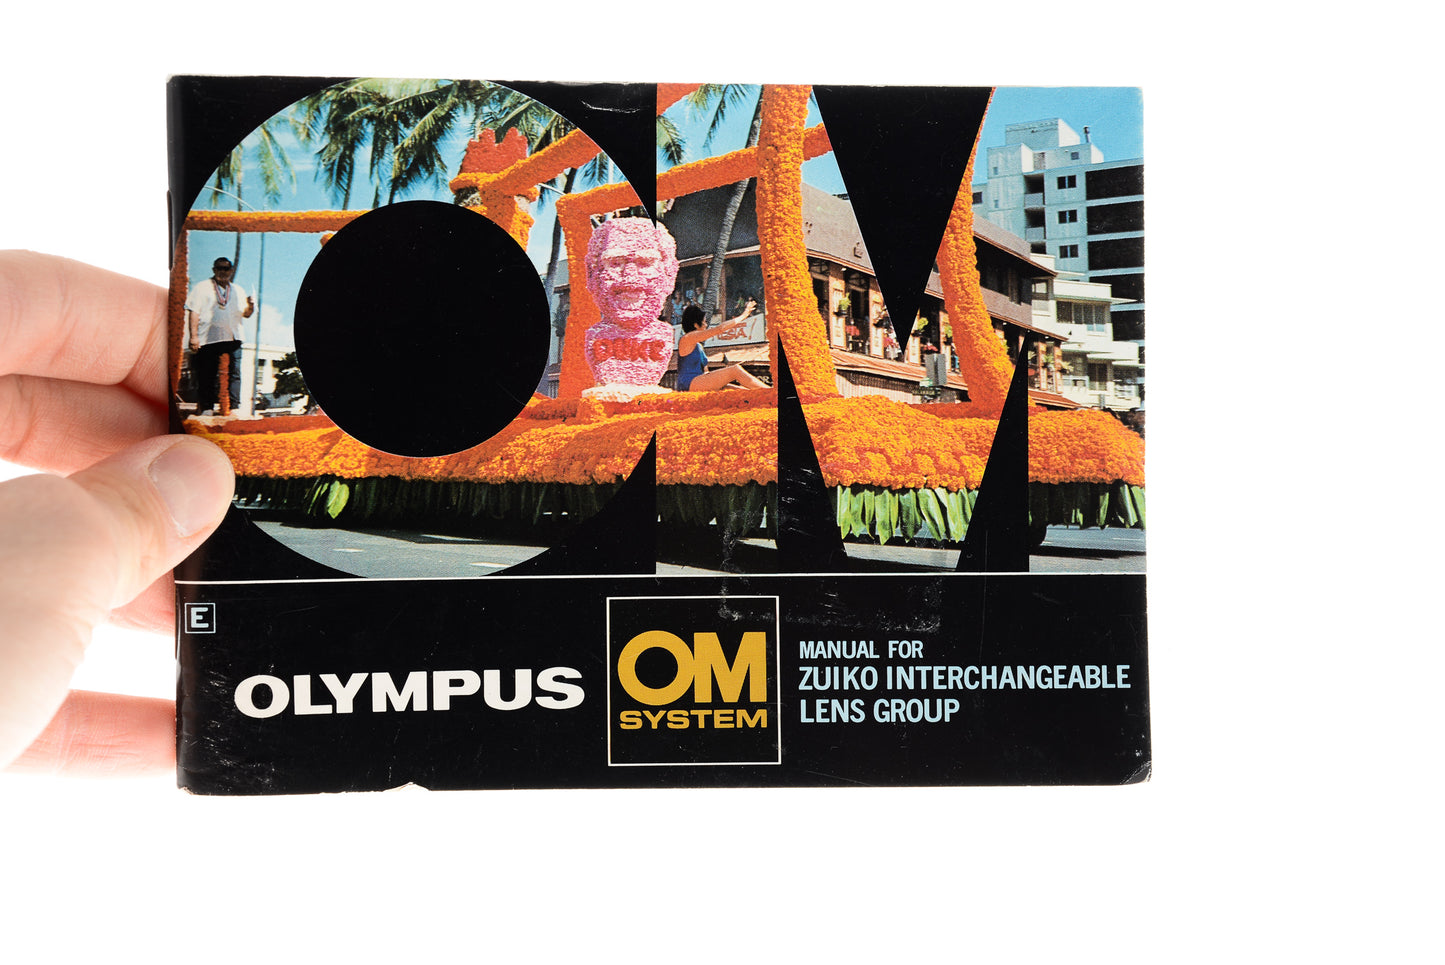 Olympus Manual for Zuiko Interchangeable Lens Group